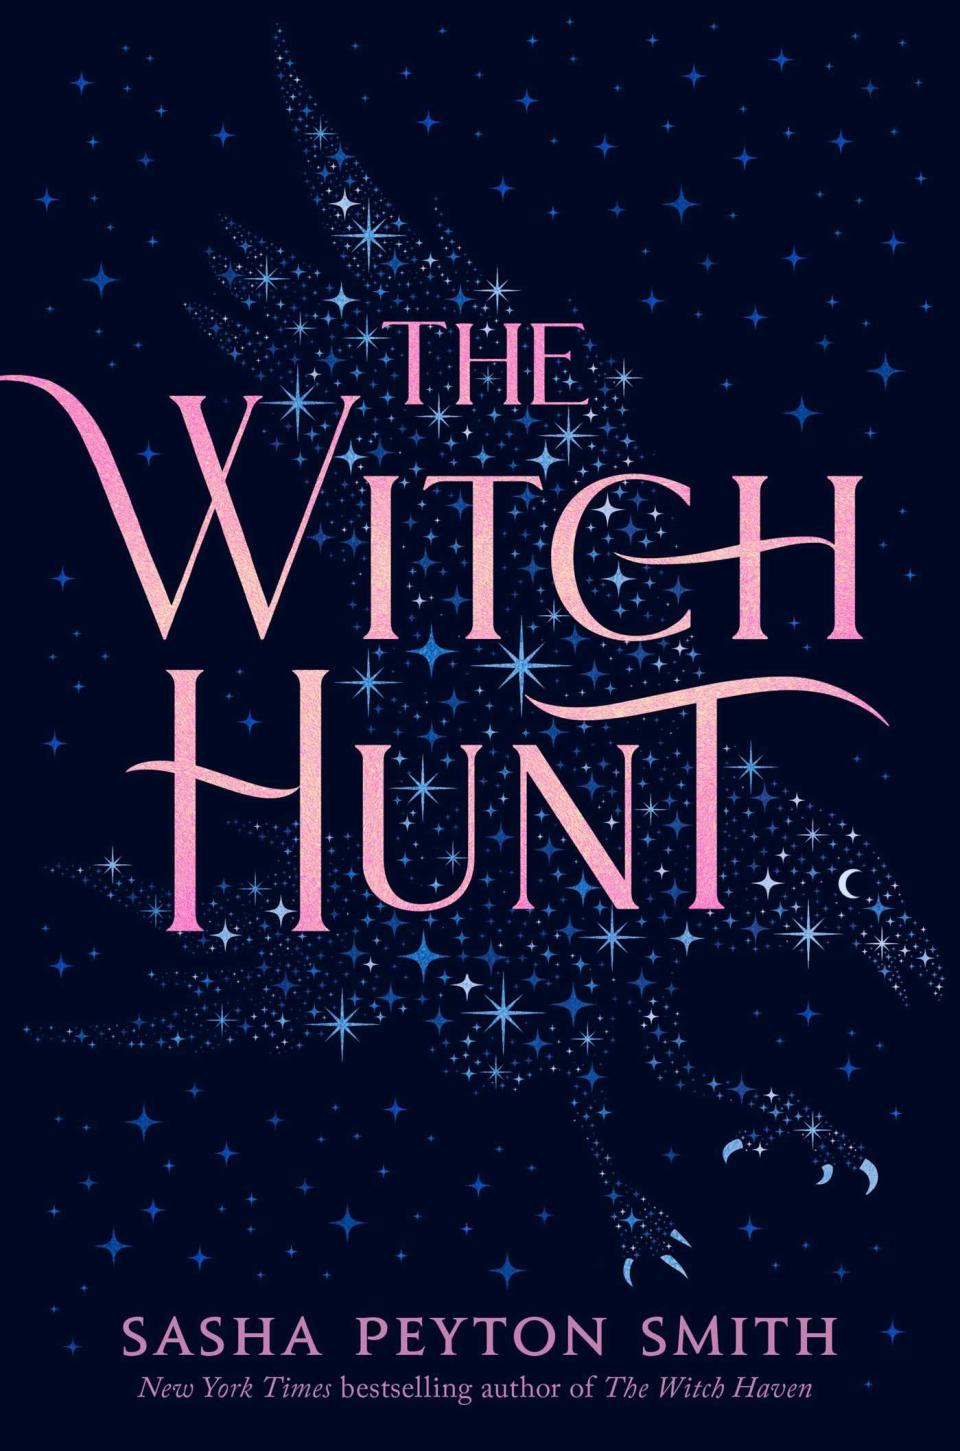 The cover for The Witch Hunt shows the title on a starry background.